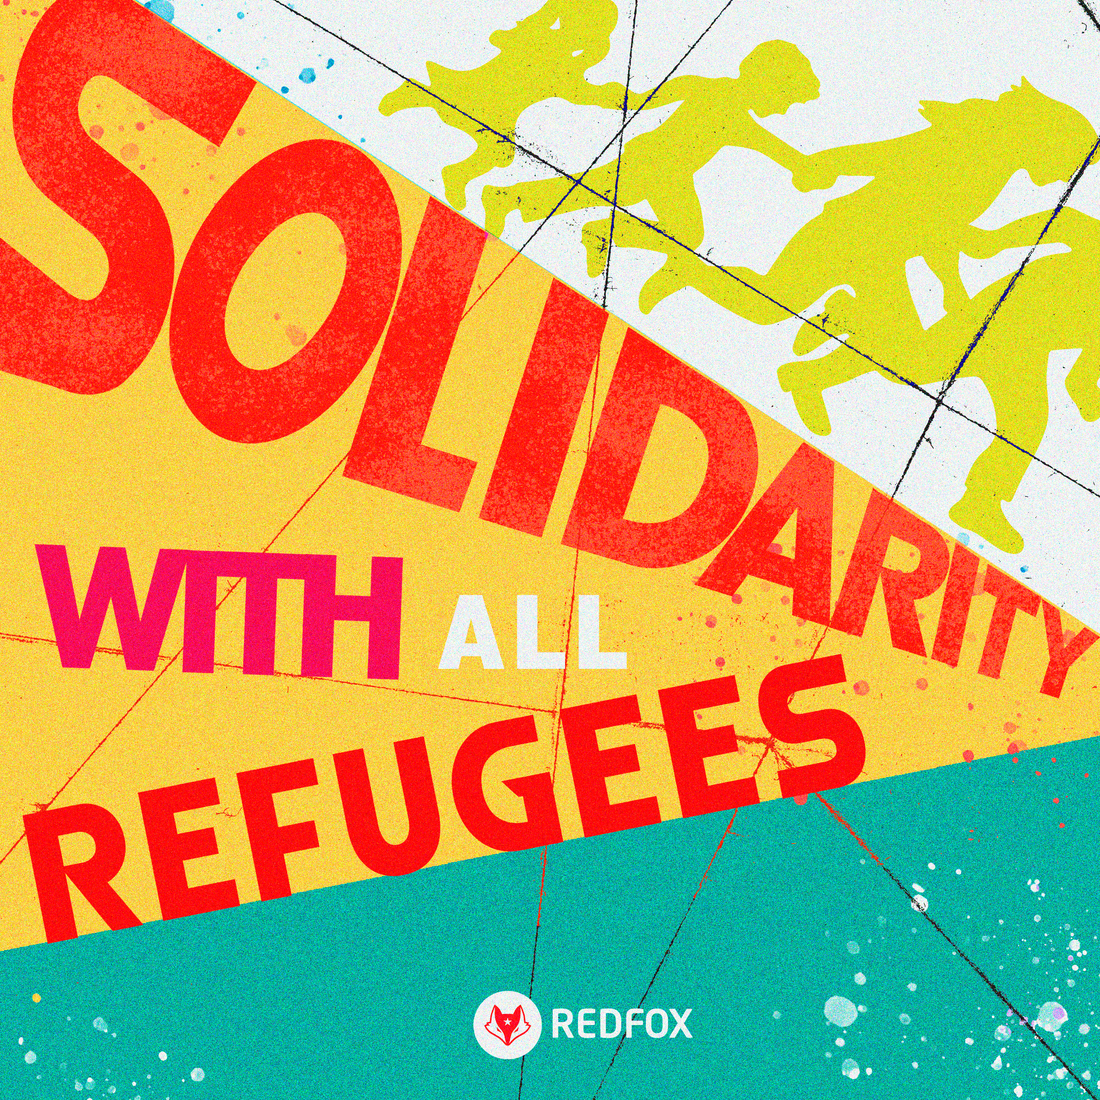 Solidarity with all refugees - Sticker